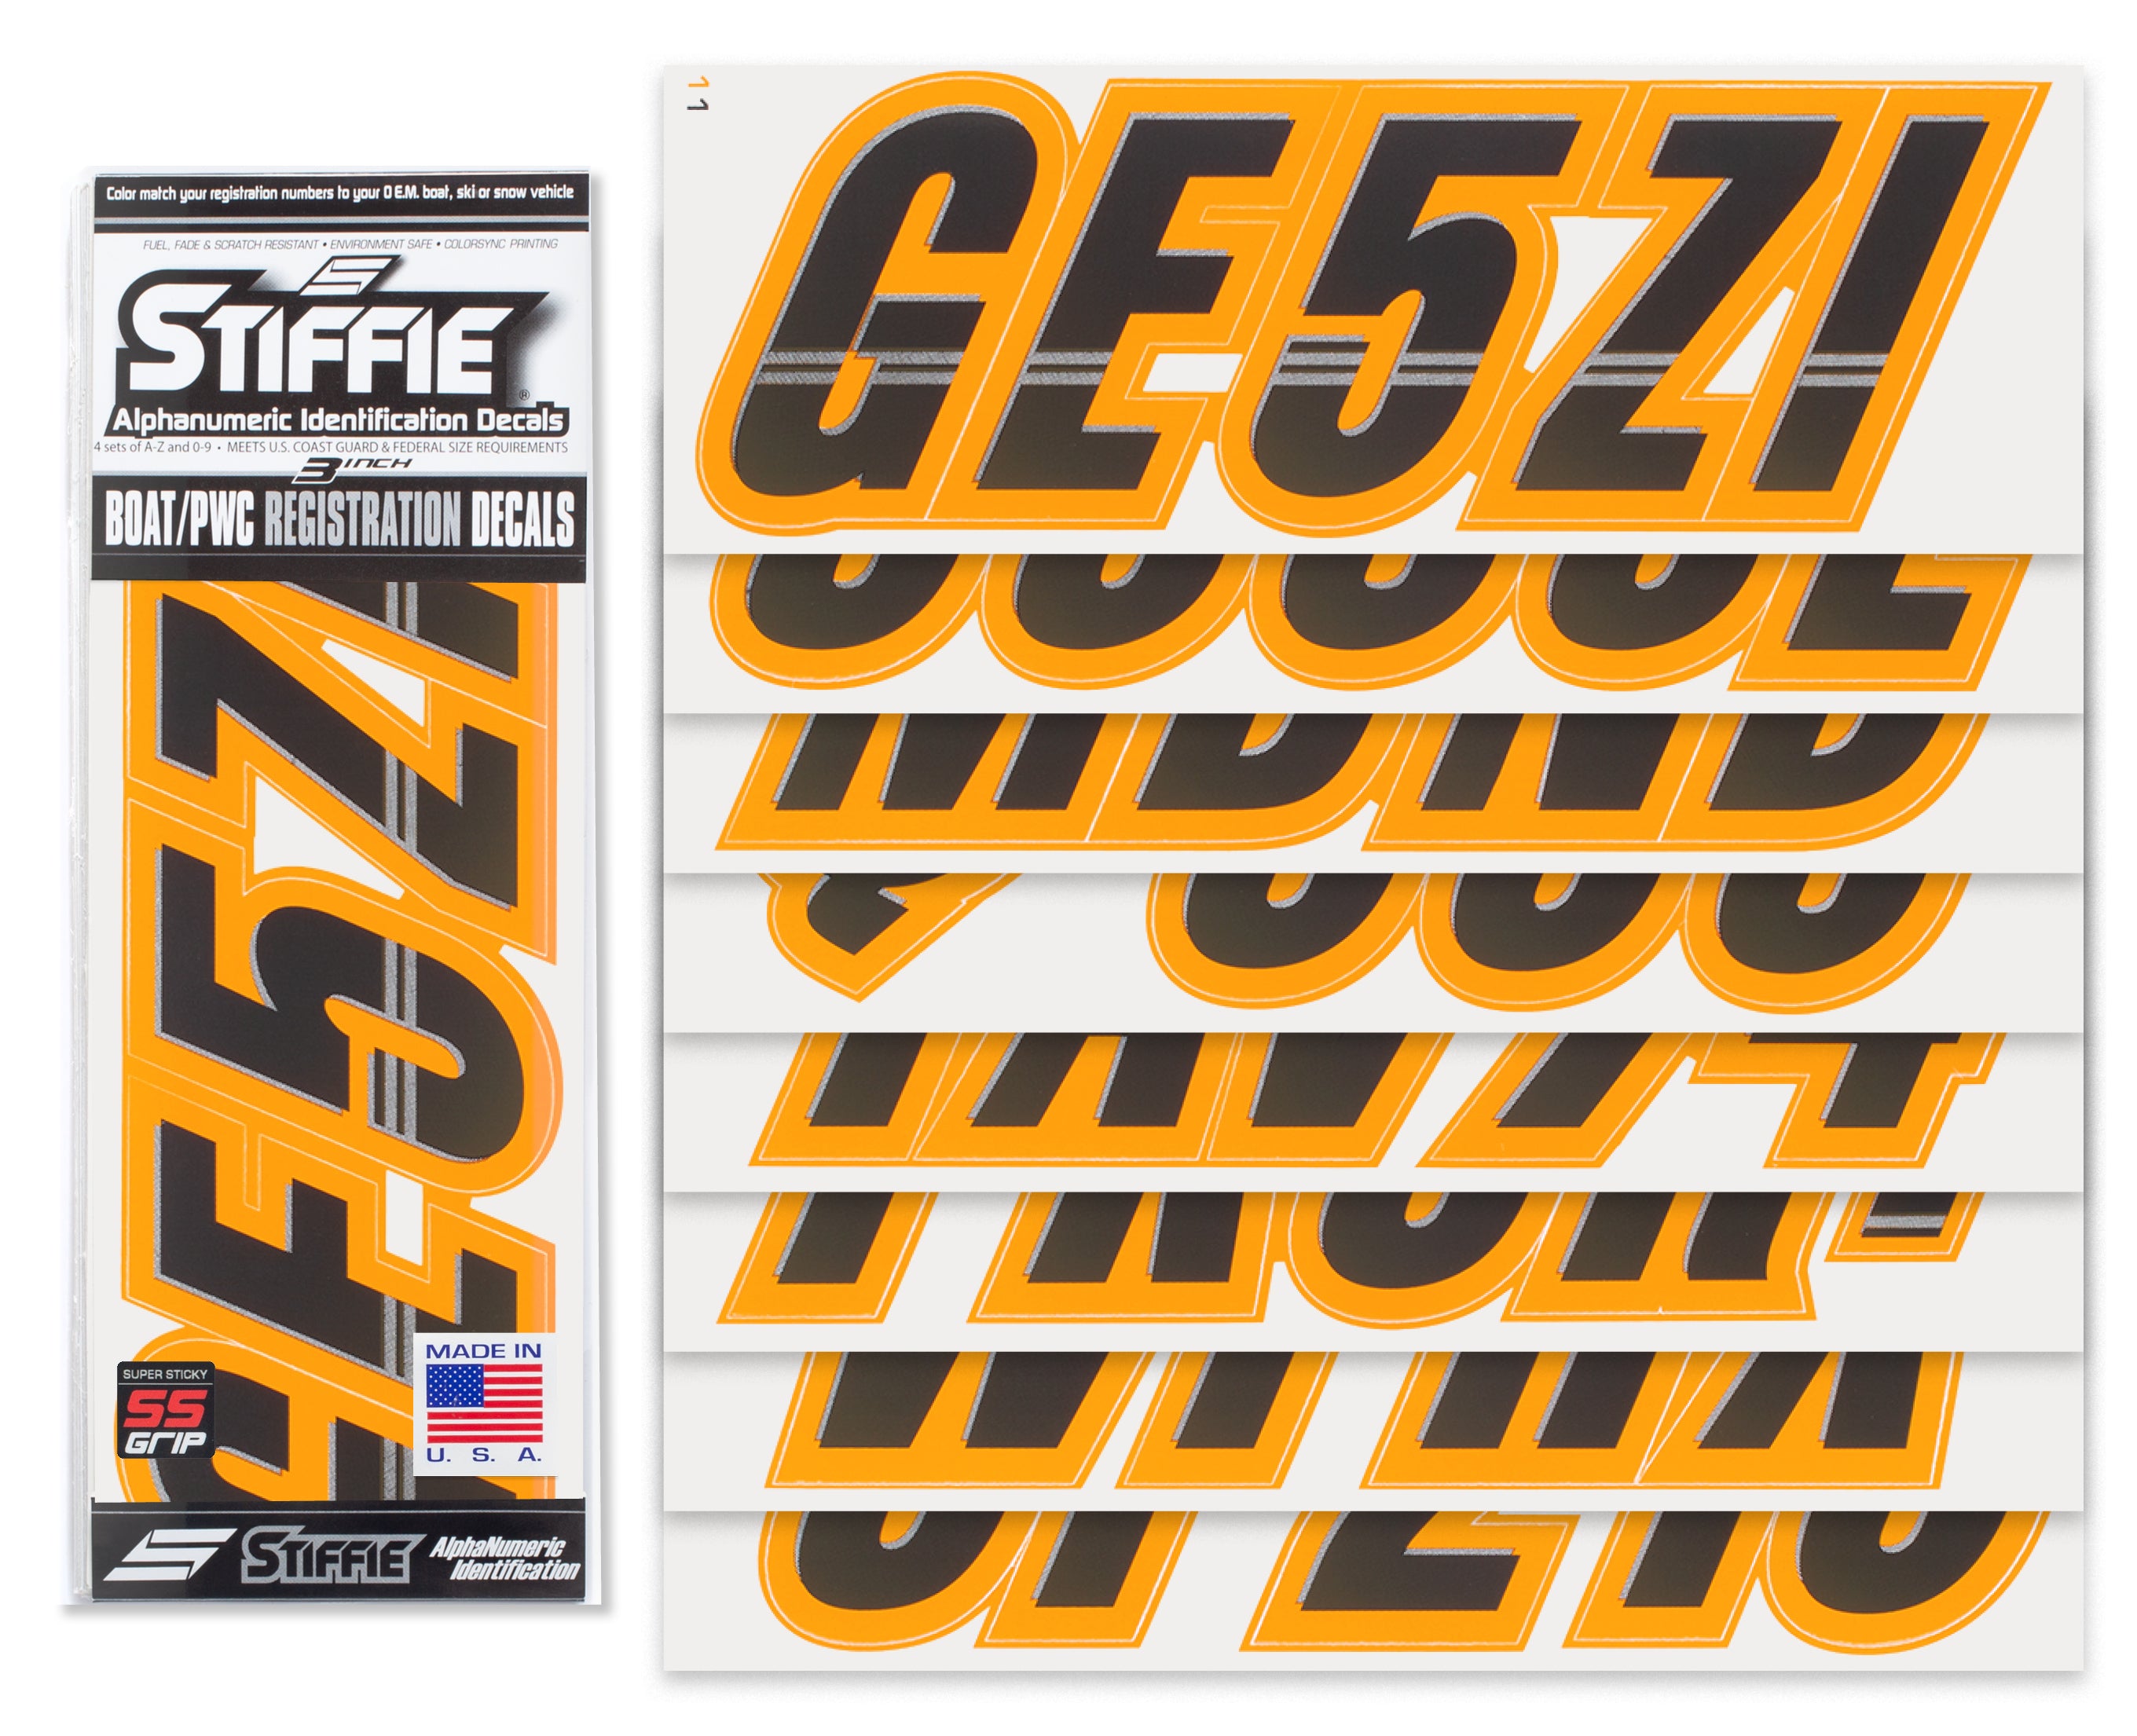 Stiffie Techtron Black/Orange Crush Super Sticky 3" Alpha Numeric Registration Identification Numbers Stickers Decals for Sea-Doo Spark, Inflatable Boats, Ribs, Hypalon/PVC, PWC and Boats